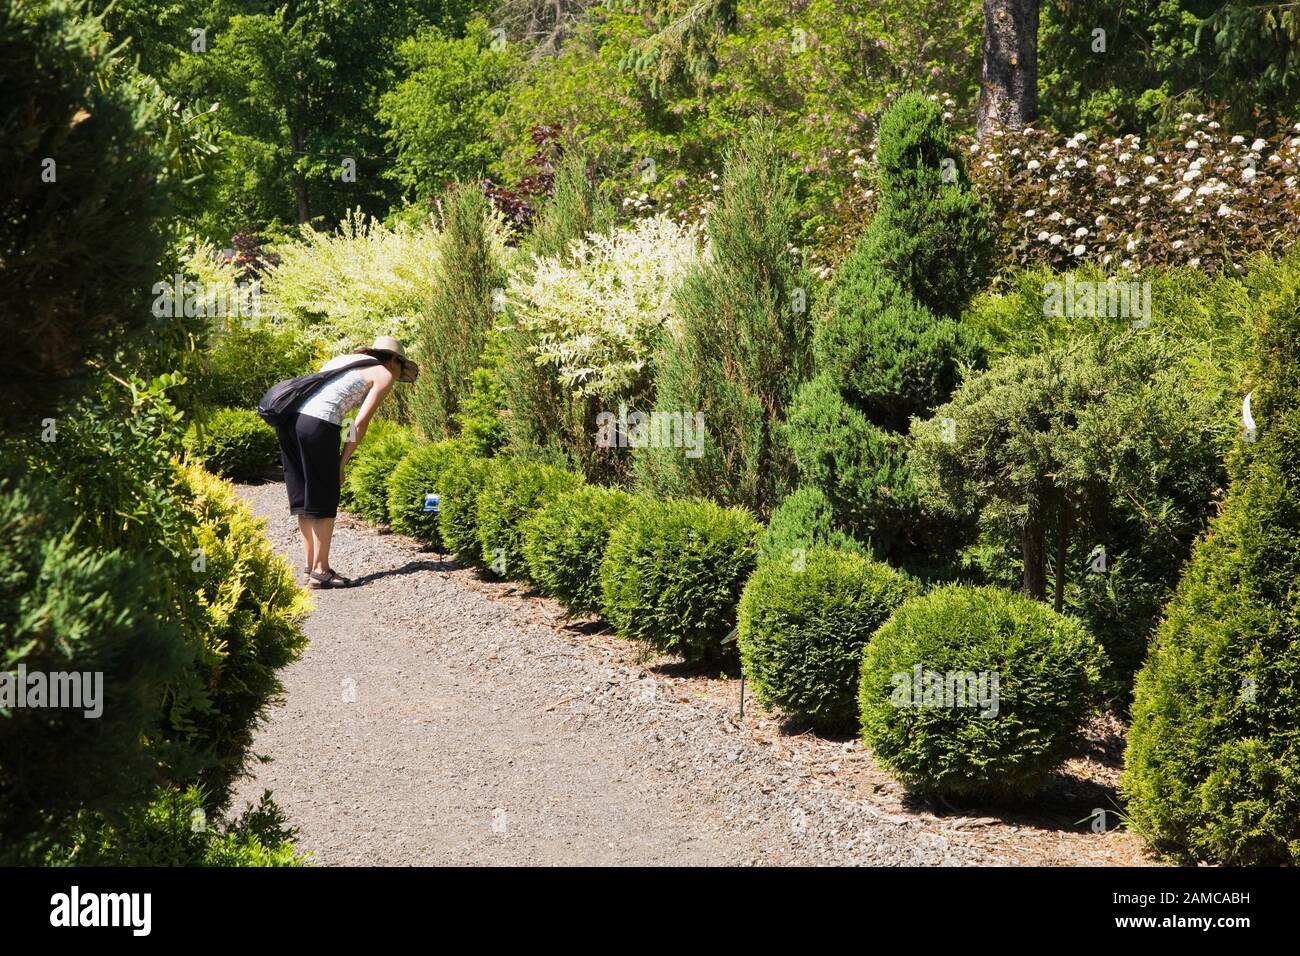 Woman on gravel path reading the information card for Thuja occidentalis ‘Golden Globe’ - Cedar shrubs in late spring in French formal garden. Stock Photo